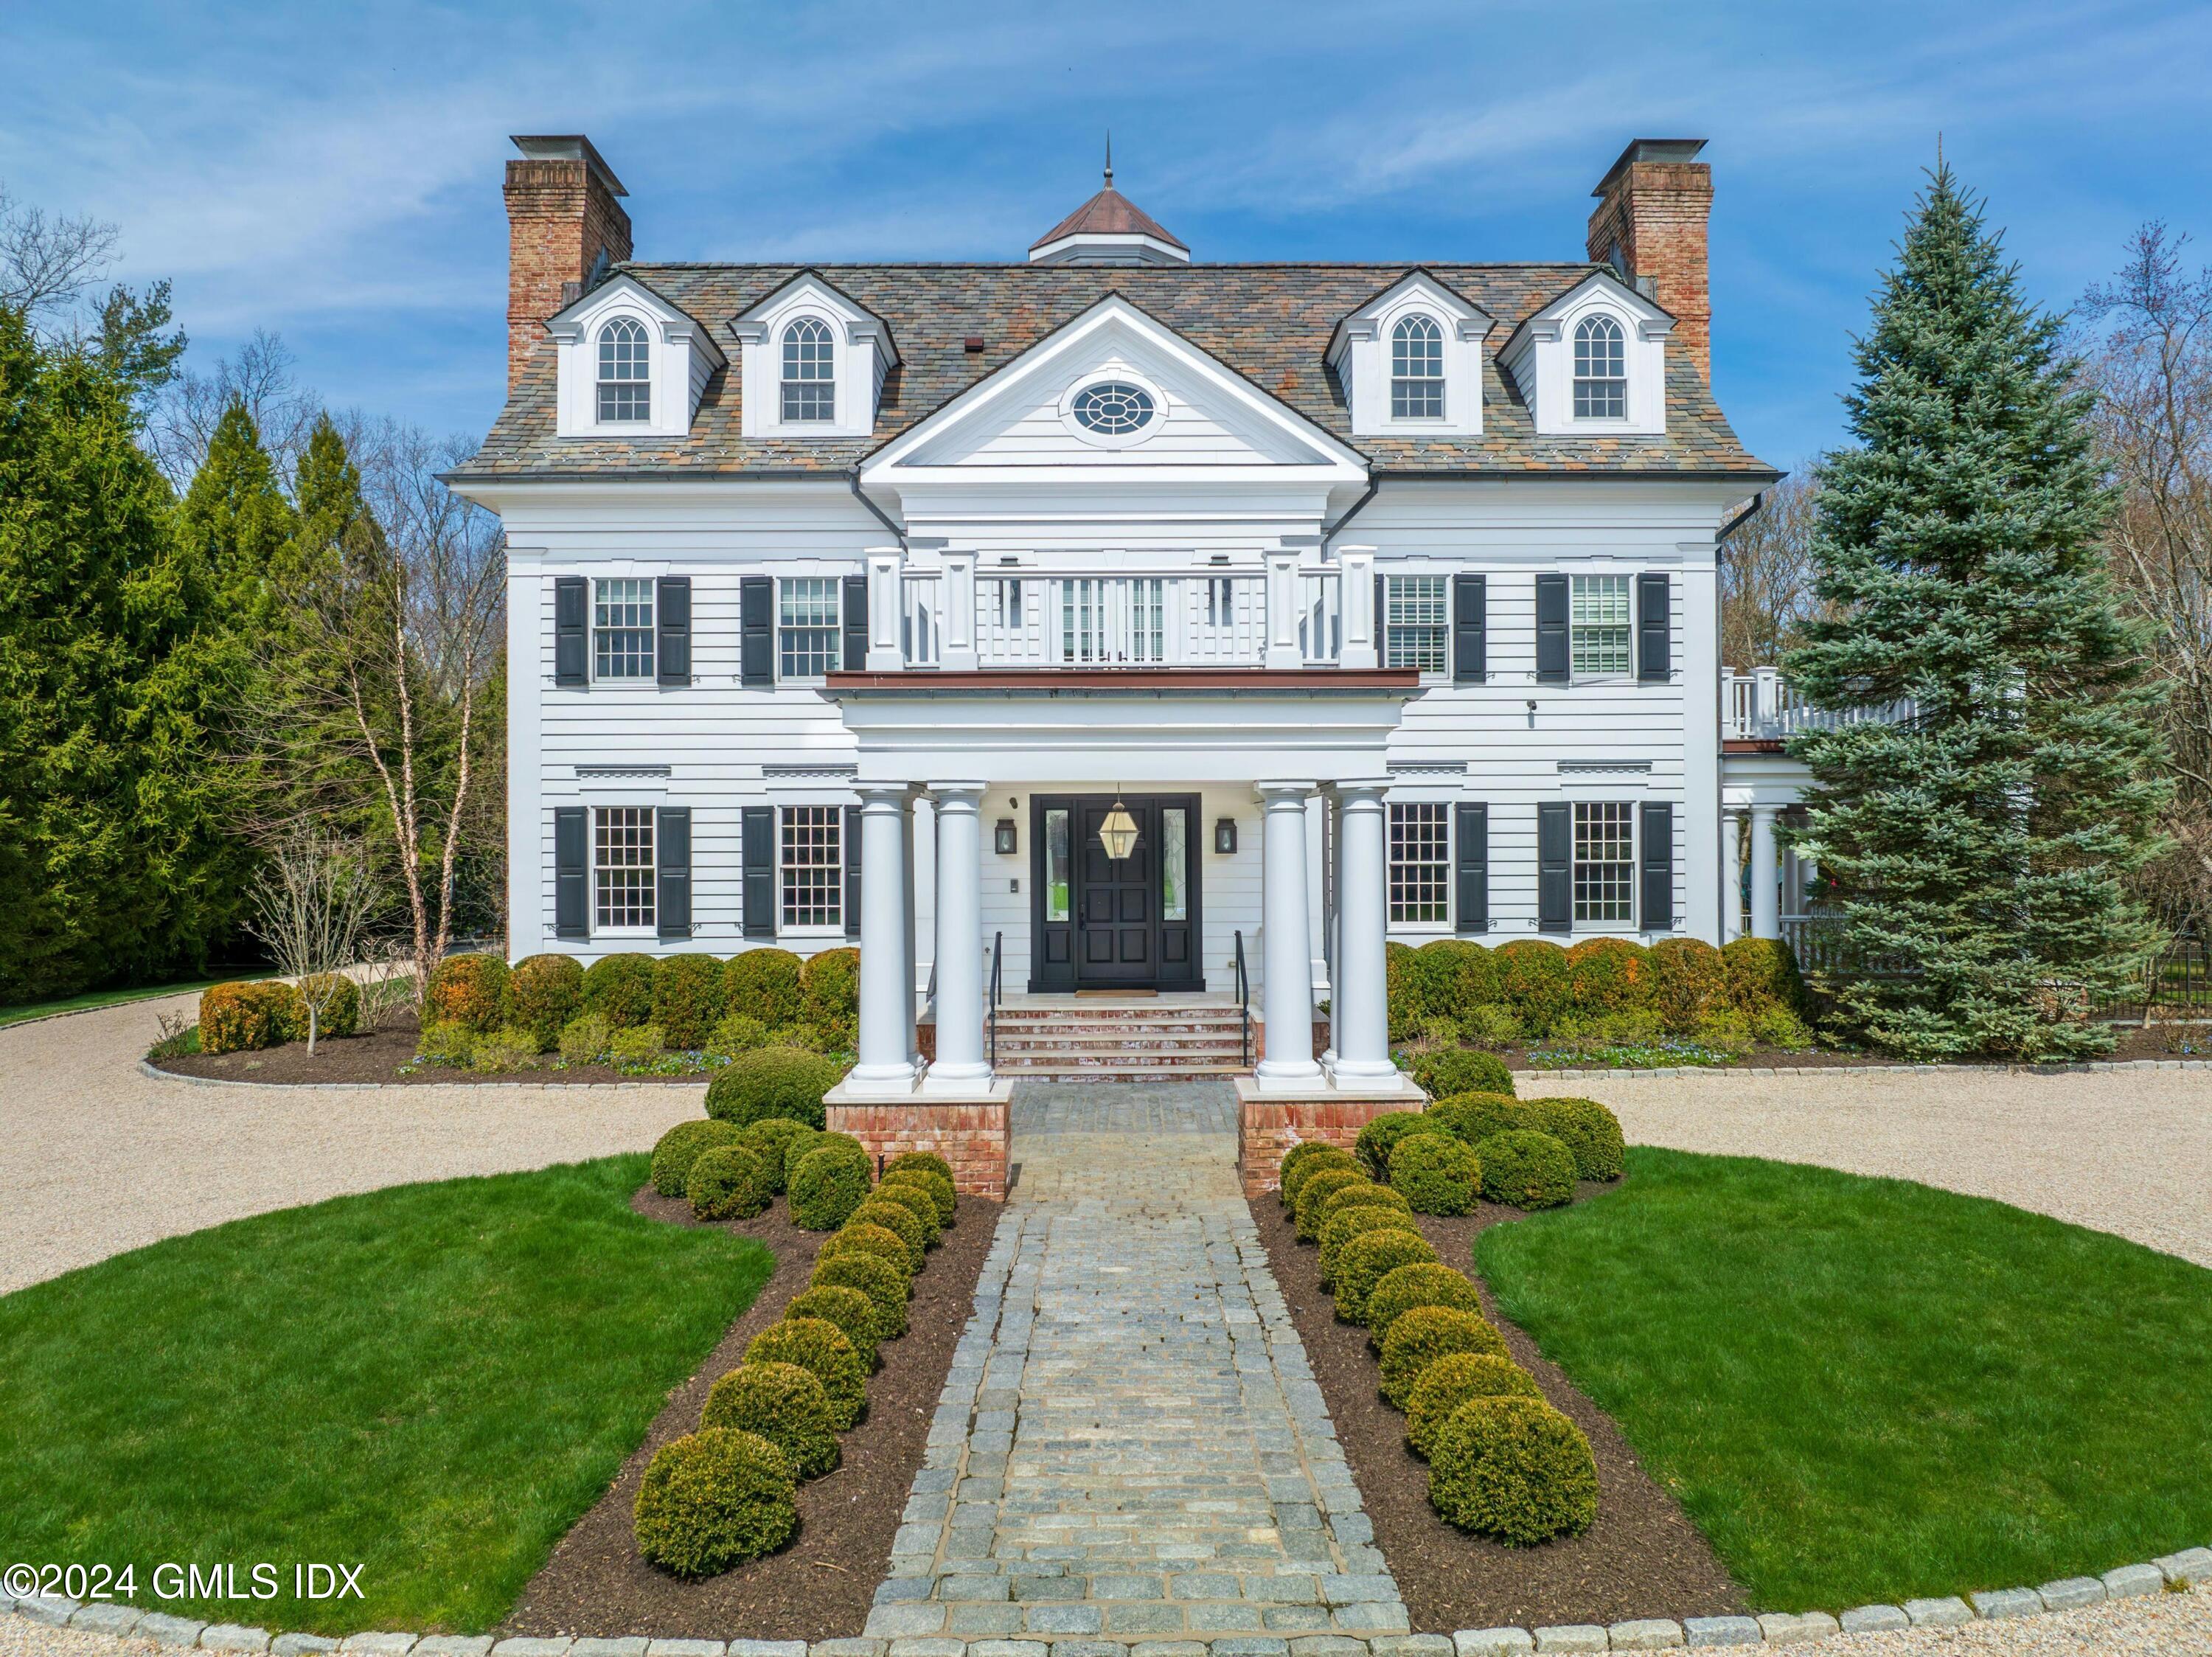 4 Cherry Blossom Lane, Greenwich, Connecticut - 7 Bedrooms  
8.5 Bathrooms - 